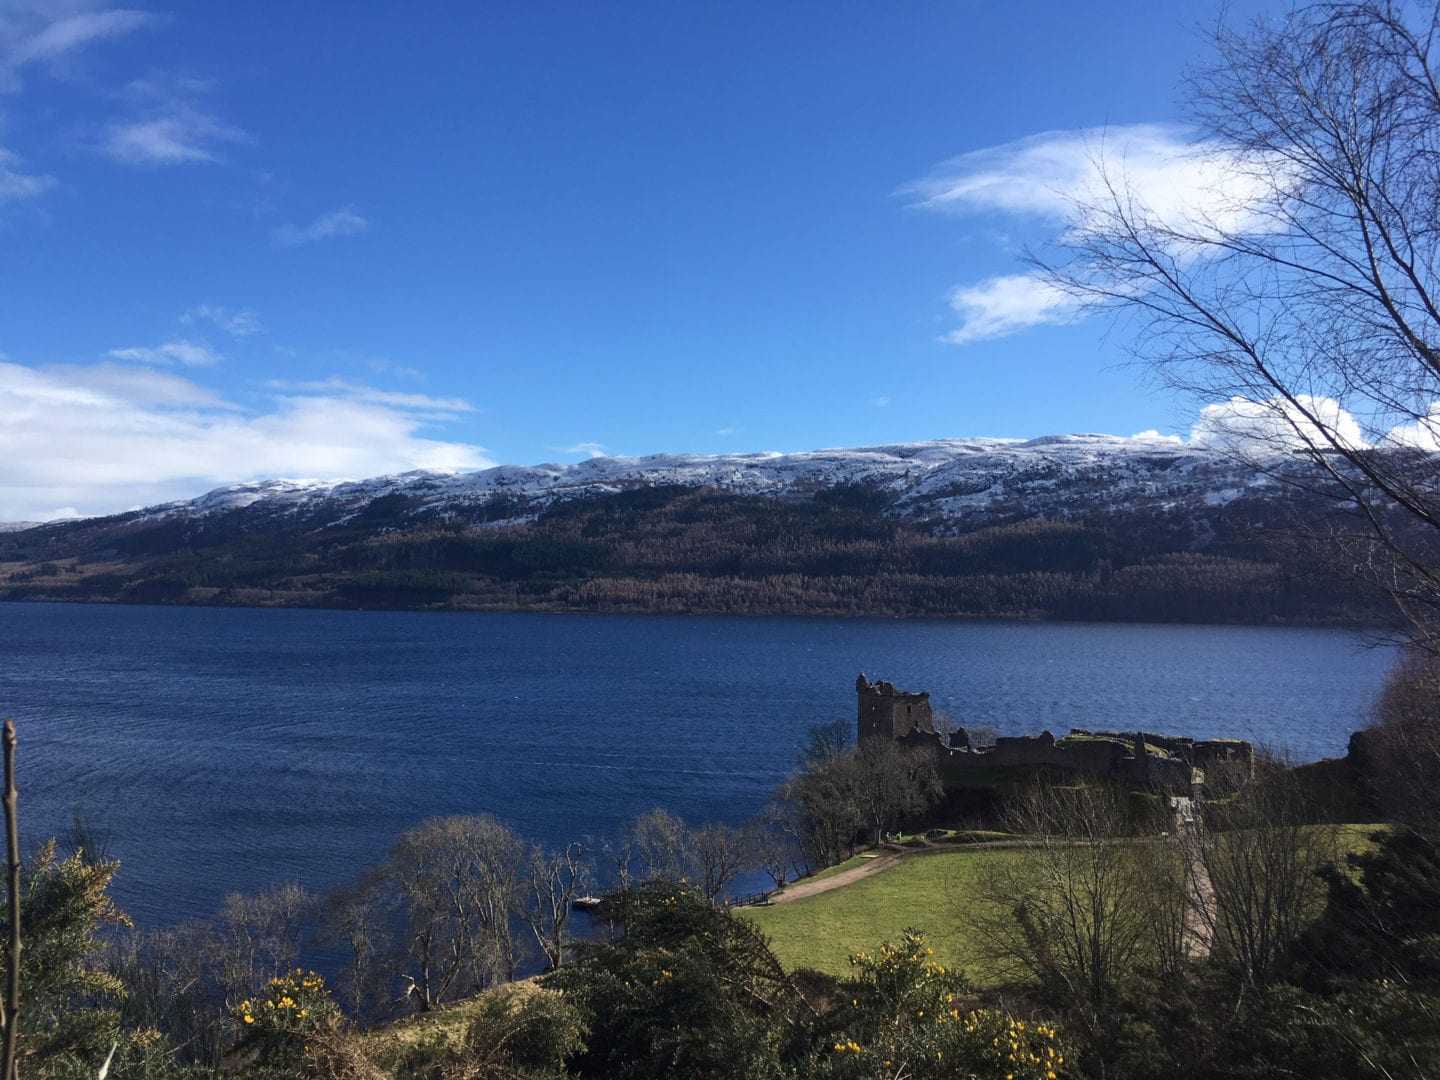 Loch Ness and Urquhart Castle, loch ness backpackers